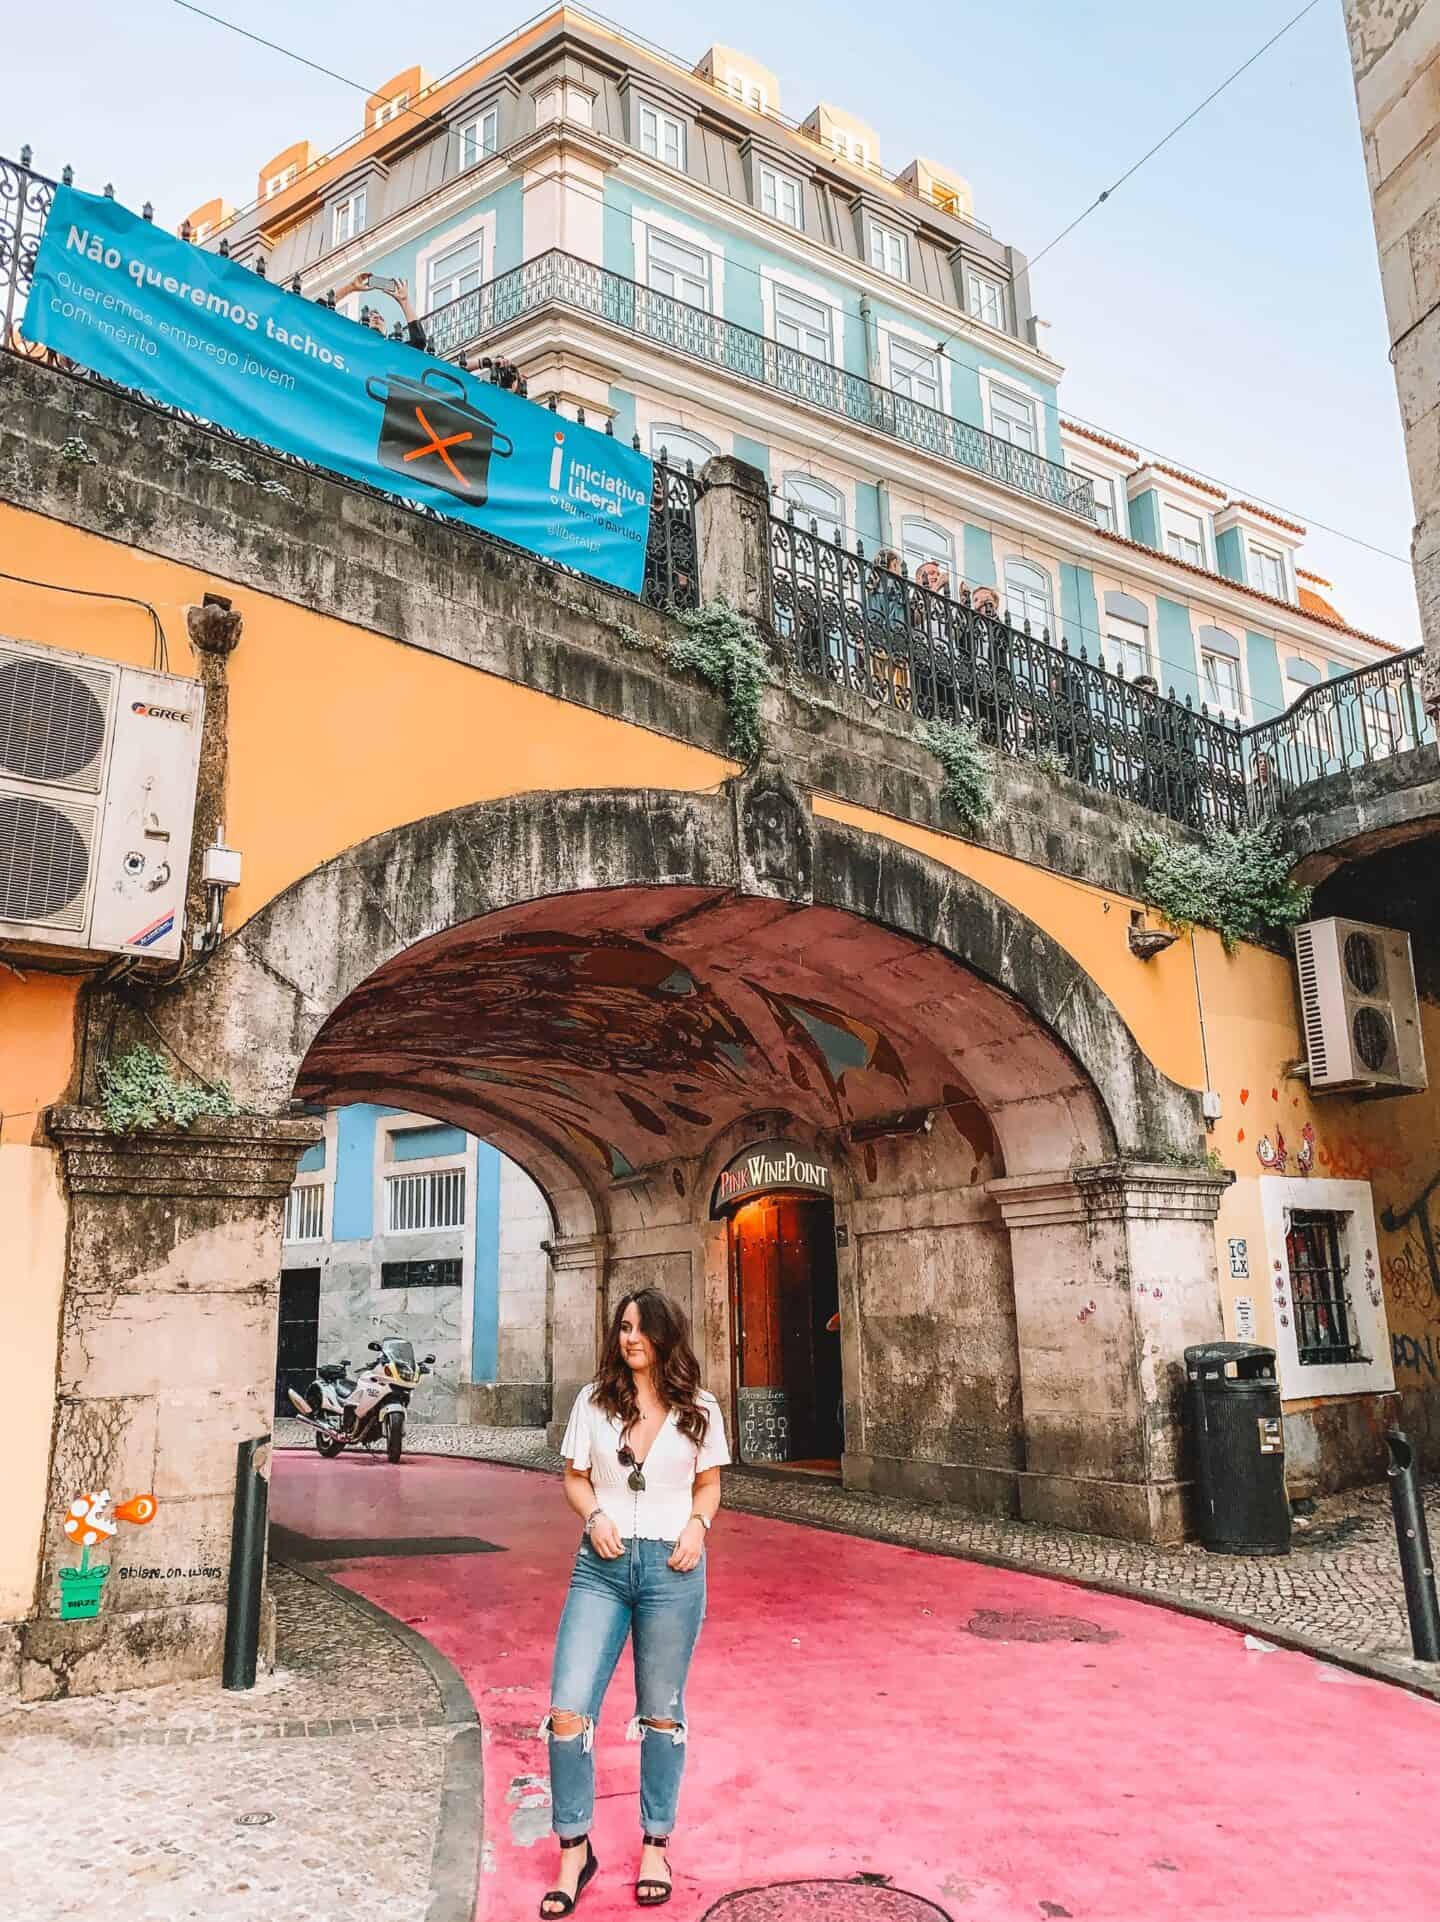 Lisbon's famous Pink Street is not to be missed during 5 days in Lisbon. 